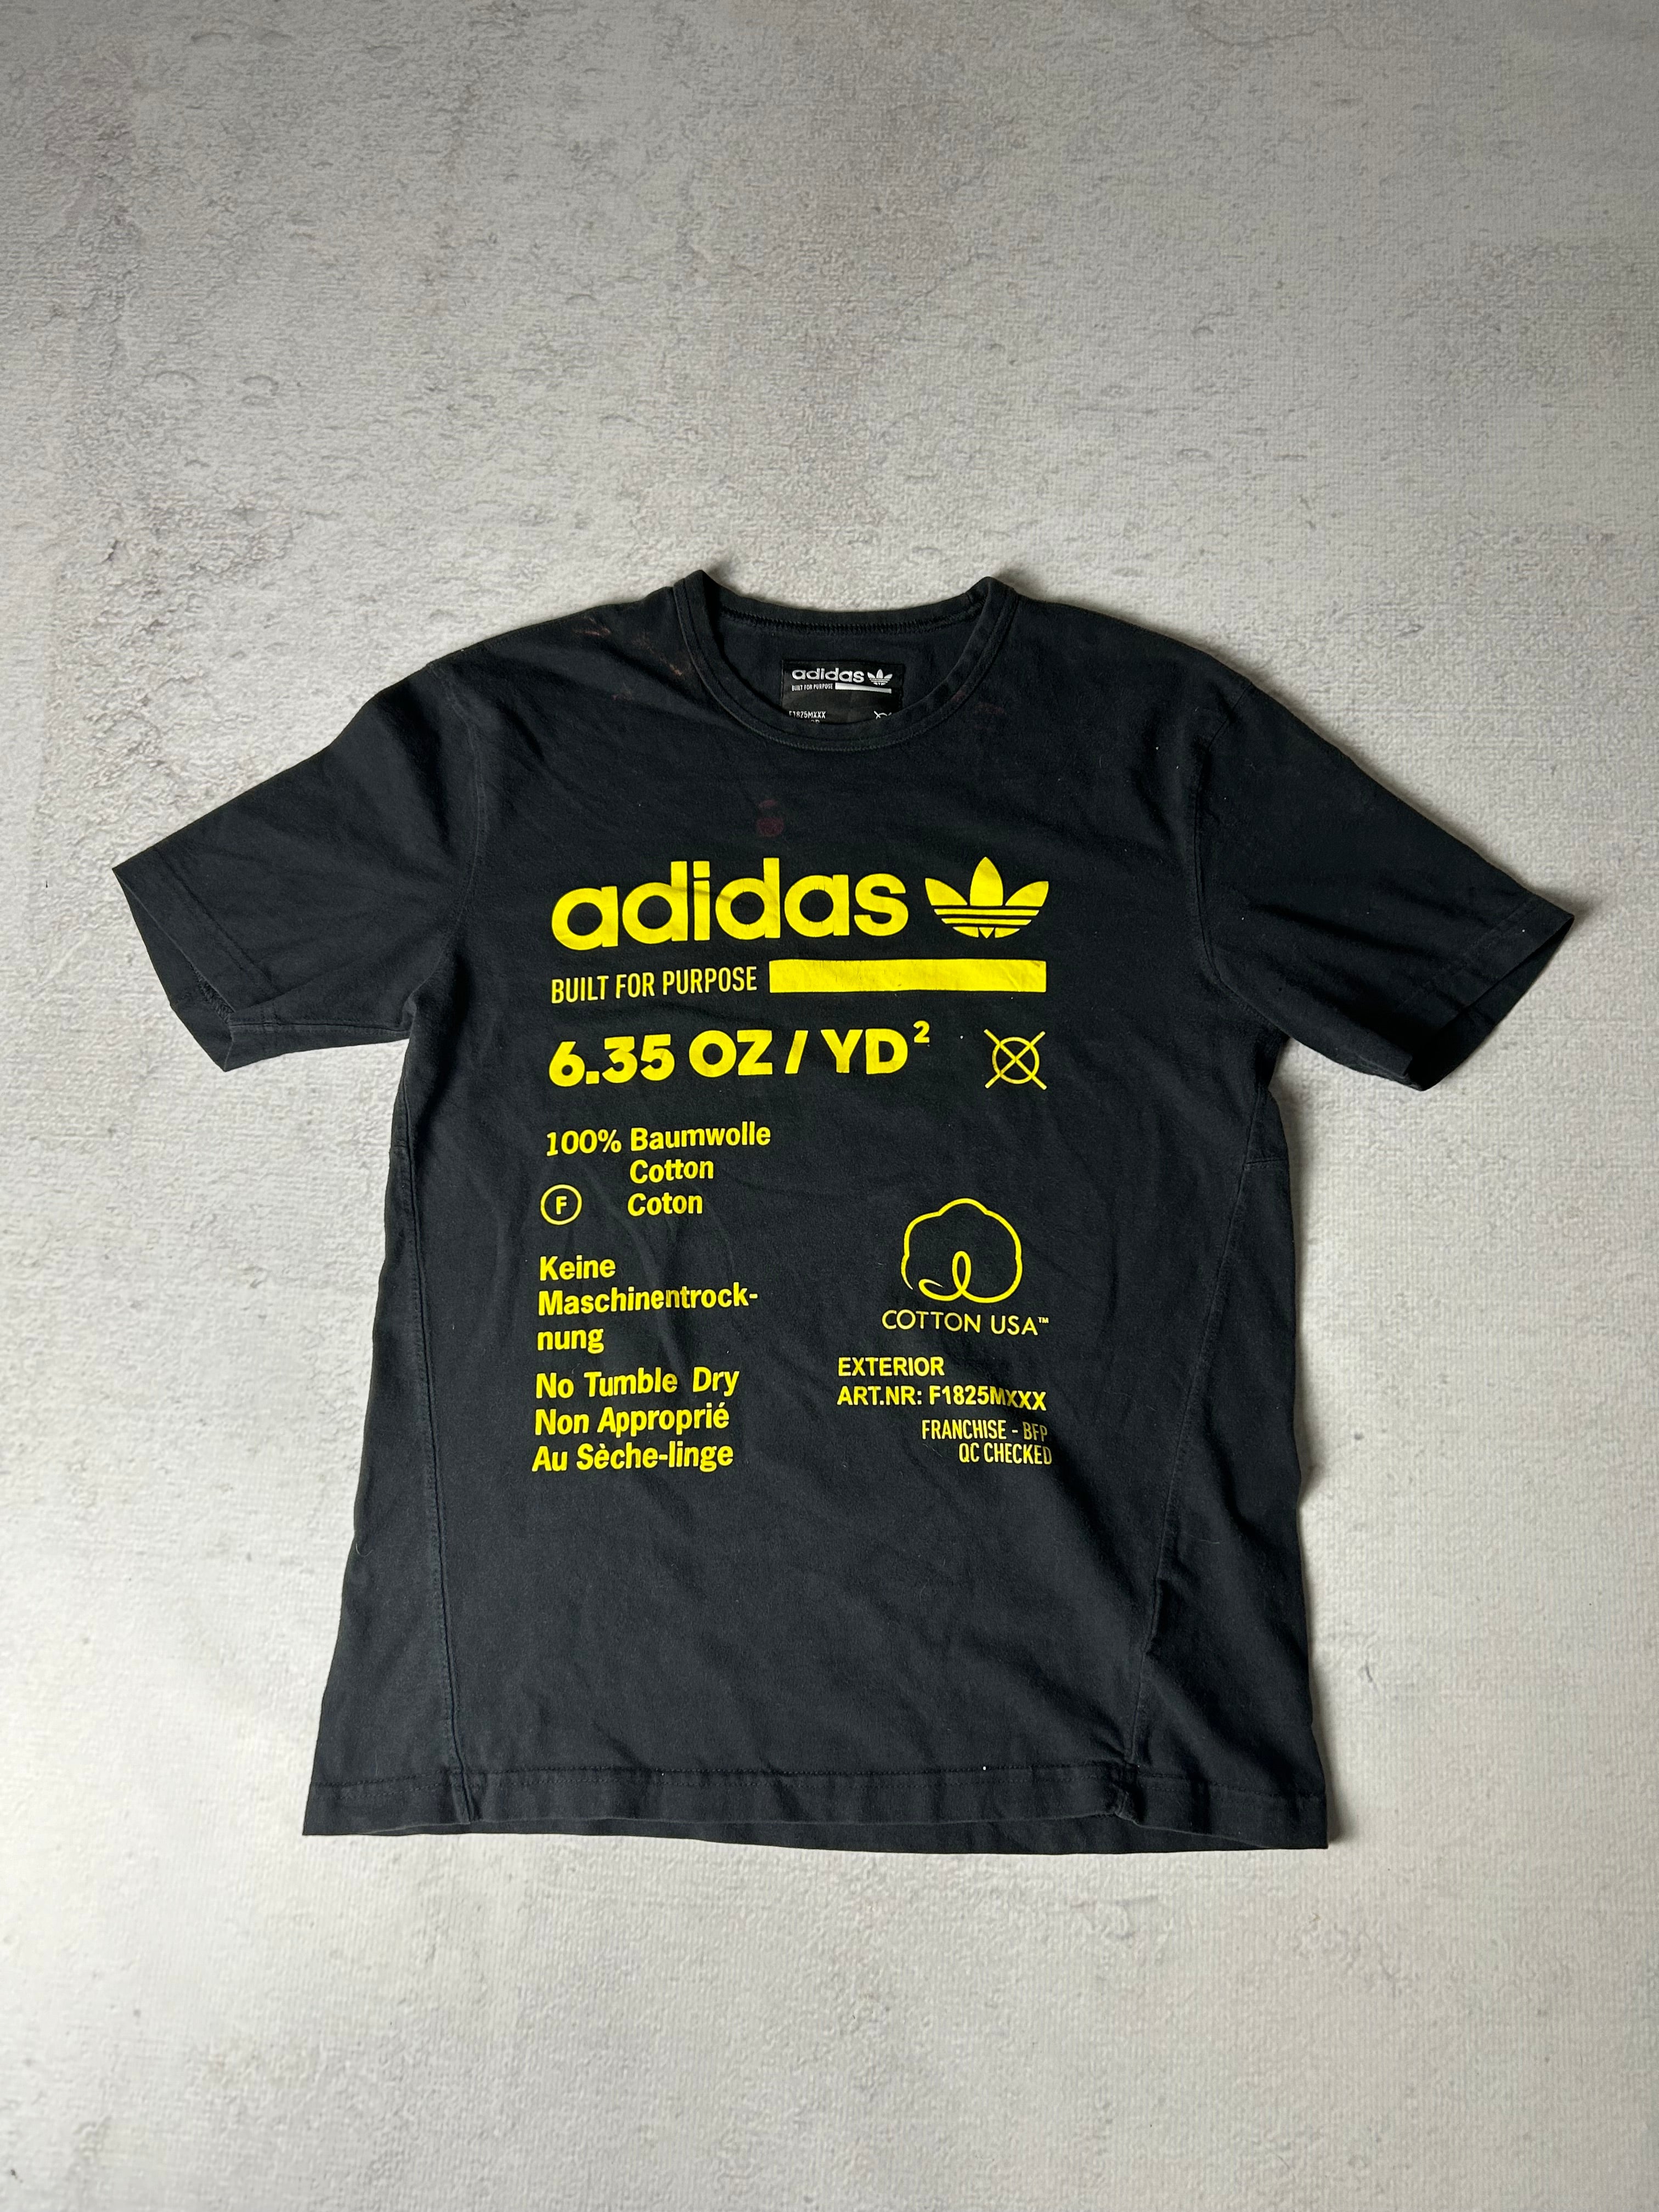 Vintage Adidas Graphic T-Shirt - Men's Small